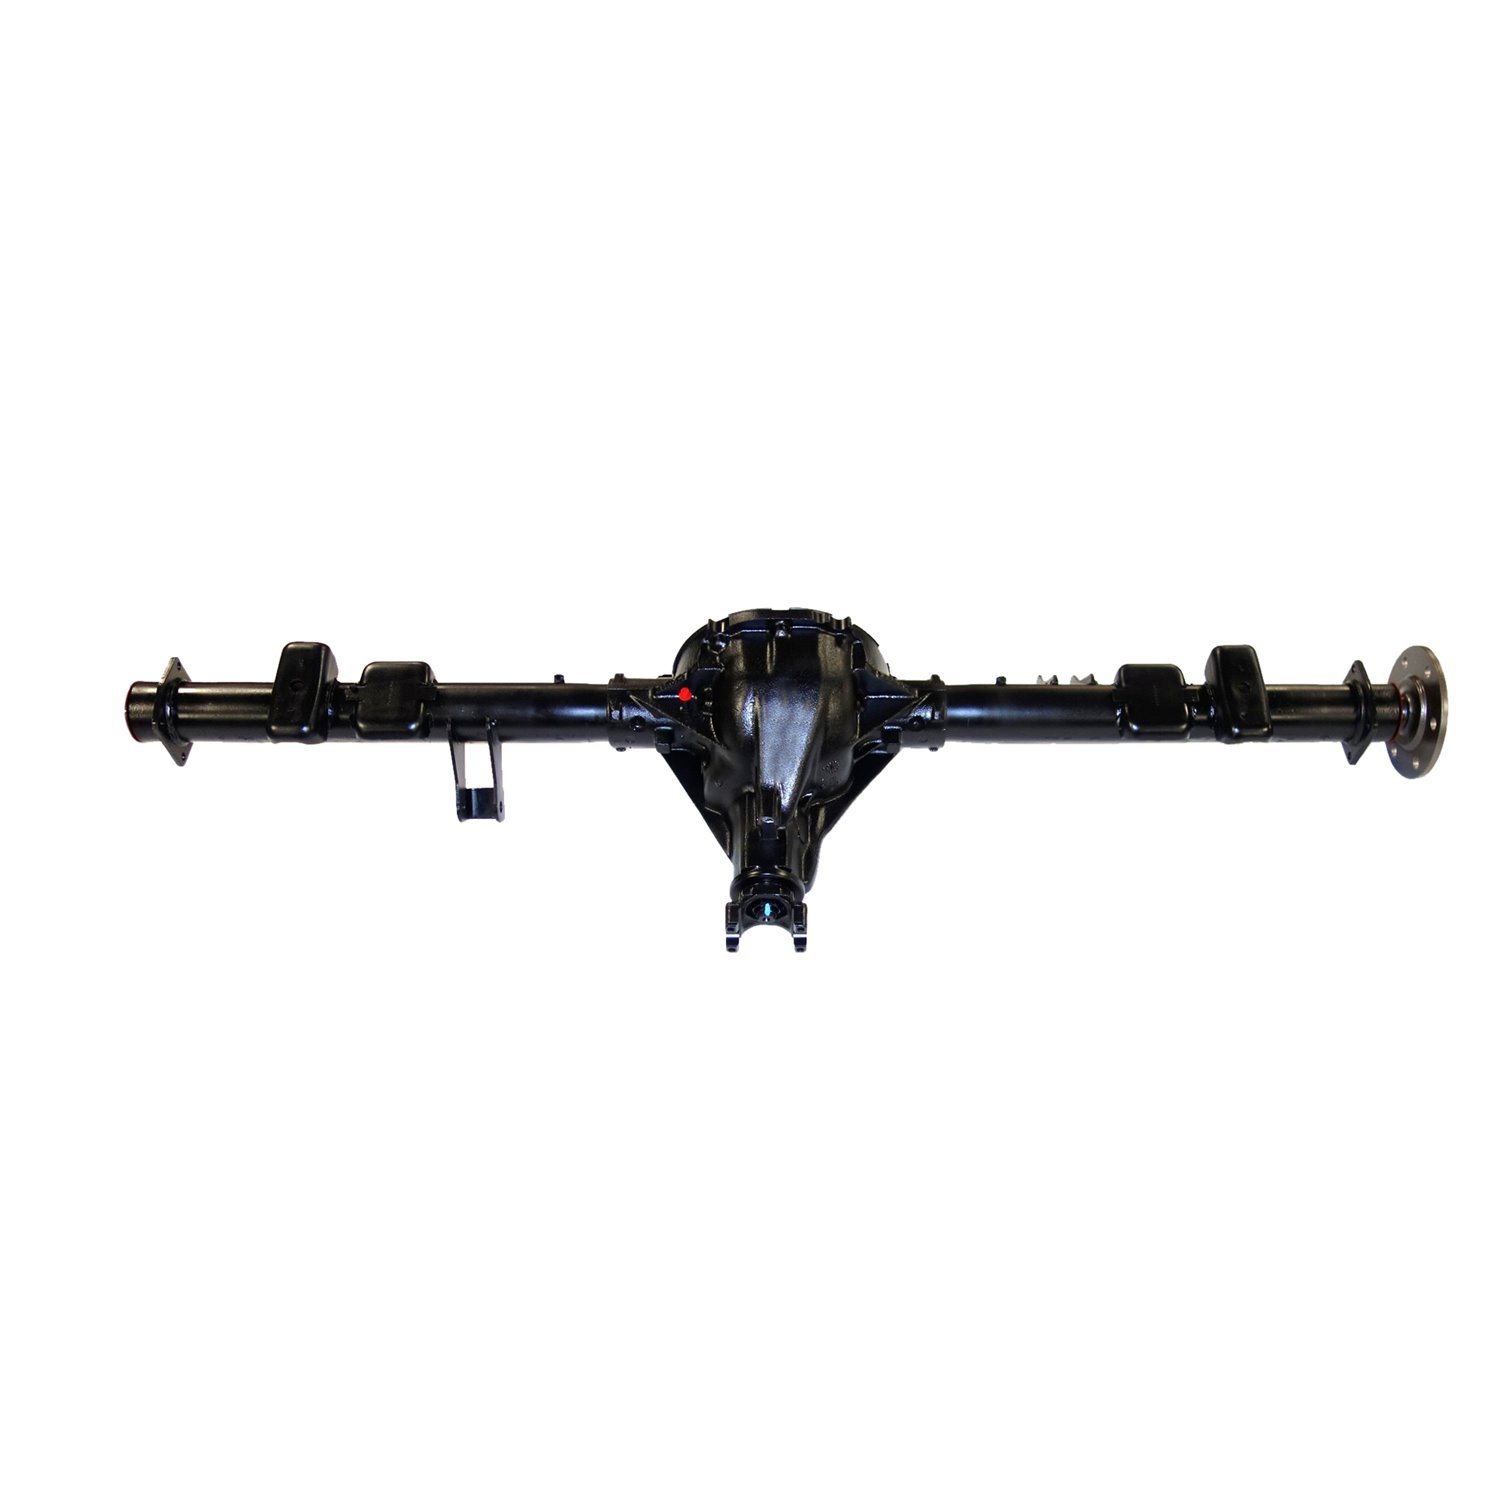 Remanufactured Complete Axle Assembly for GM 8.5" 92-94 GM Suburban 1500, 2wd, 3.73 Ratio